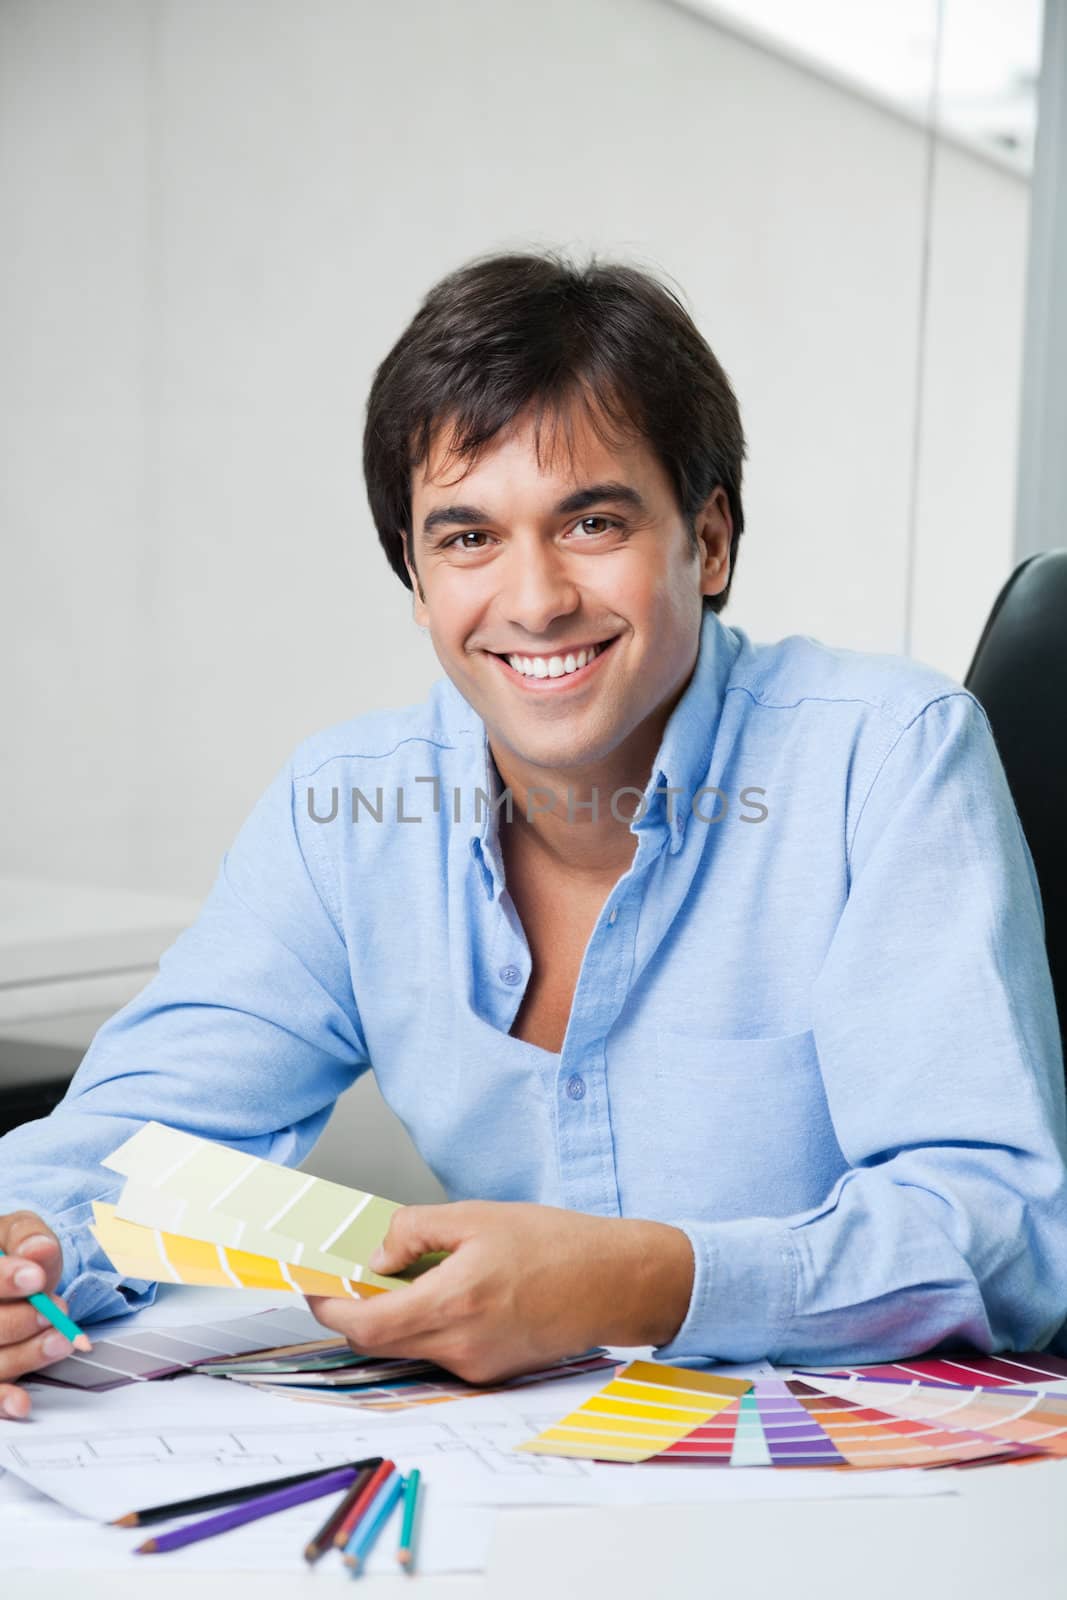 Portrait of young male interior designer smiling while holding color swatches